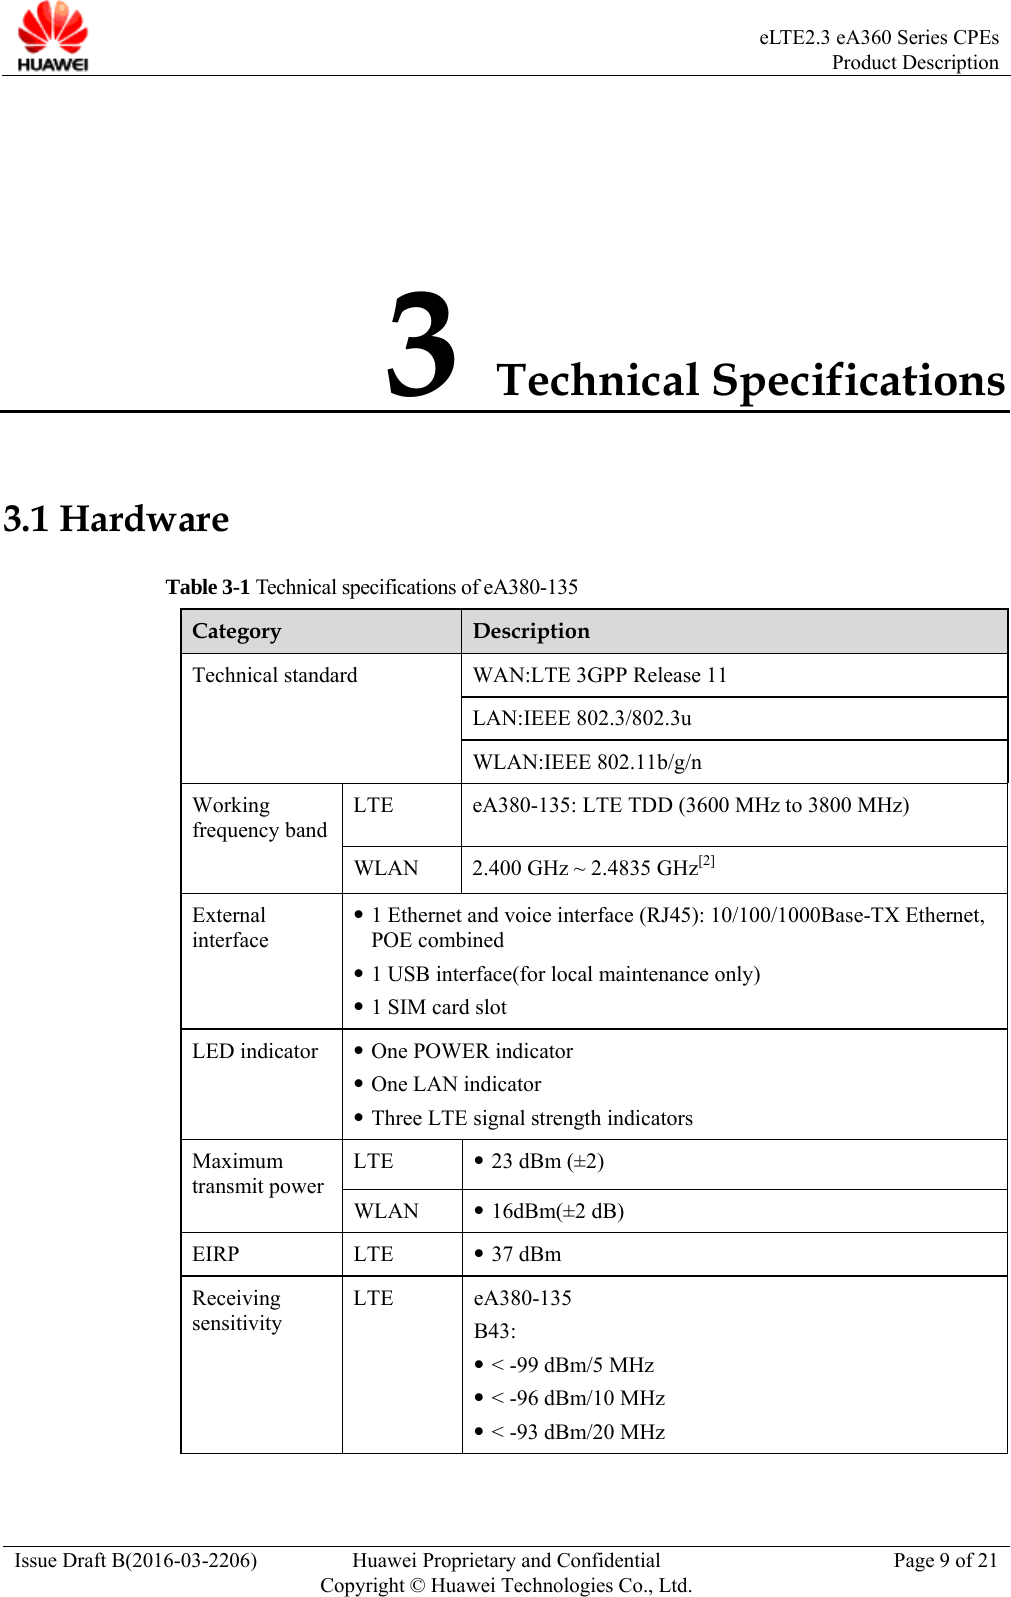  eLTE2.3 eA360 Series CPEsProduct Description Issue Draft B(2016-03-2206)  Huawei Proprietary and Confidential Copyright © Huawei Technologies Co., Ltd.Page 9 of 21 3 Technical Specifications 3.1 Hardware Table 3-1 Technical specifications of eA380-135   Category  Description Technical standard  WAN:LTE 3GPP Release 11 LAN:IEEE 802.3/802.3u WLAN:IEEE 802.11b/g/n Working frequency band   LTE  eA380-135: LTE TDD (3600 MHz to 3800 MHz) WLAN  2.400 GHz ~ 2.4835 GHz[2] External interface  1 Ethernet and voice interface (RJ45): 10/100/1000Base-TX Ethernet, POE combined  1 USB interface(for local maintenance only)  1 SIM card slot LED indicator   One POWER indicator  One LAN indicator  Three LTE signal strength indicators Maximum transmit power LTE   23 dBm (±2) WLAN   16dBm(±2 dB) EIRP LTE  37 dBm Receiving sensitivity LTE eA380-135 B43:  &lt; -99 dBm/5 MHz  &lt; -96 dBm/10 MHz  &lt; -93 dBm/20 MHz 